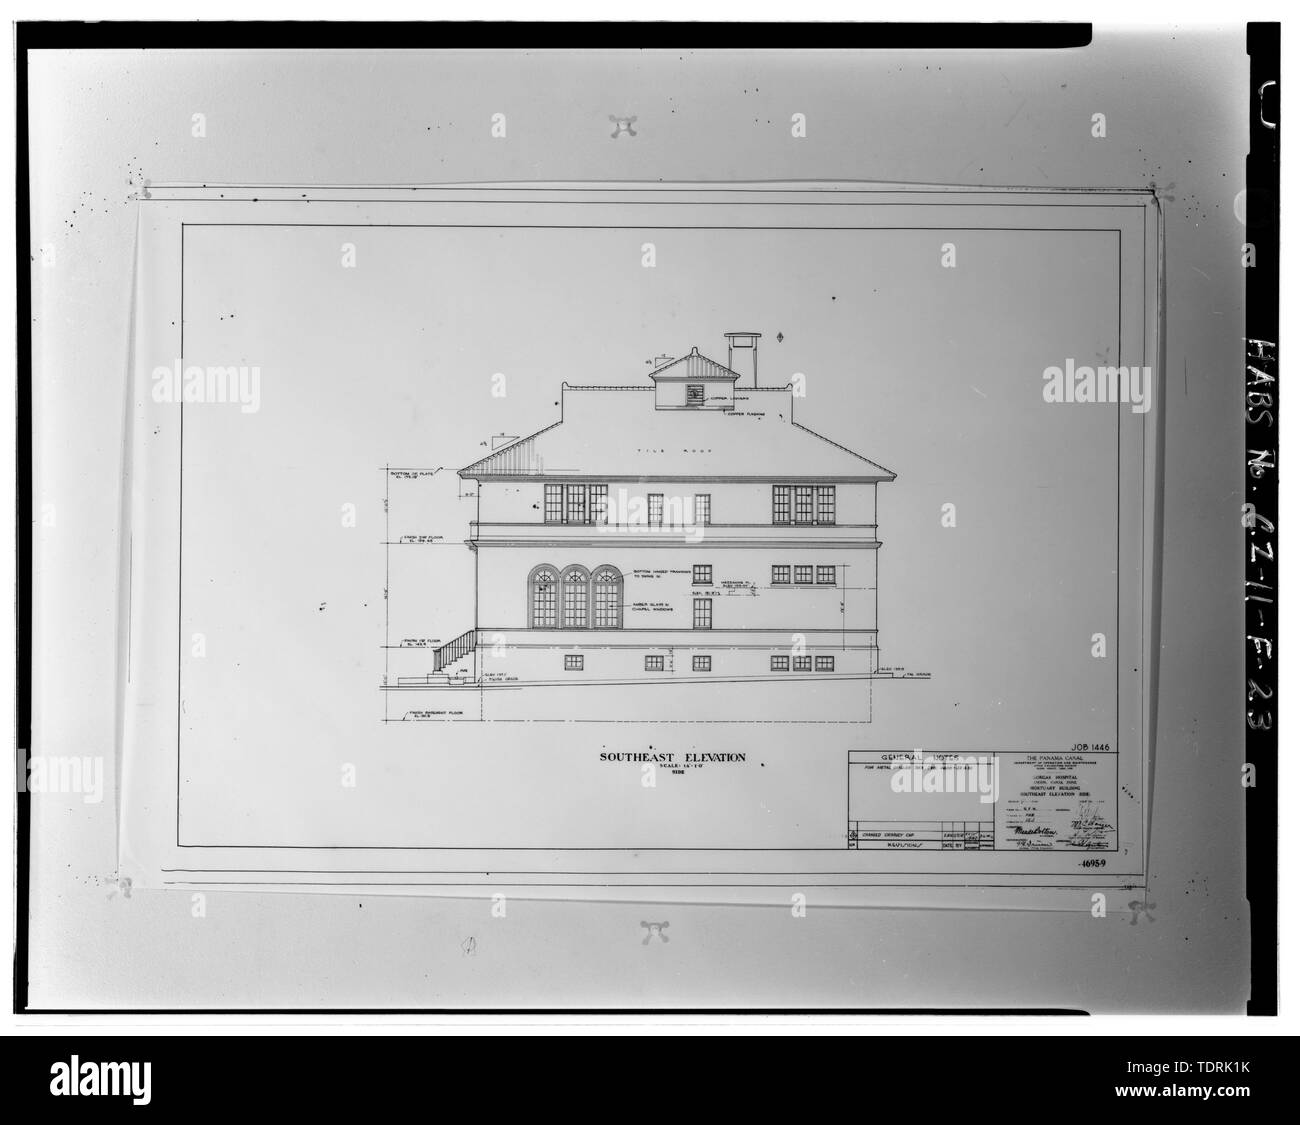 Photographic copy of architectural drawing no. 4695-9 dated 1941 on file at the Engineering and Planning Office, Panama Canal Commission, Balboa, Republic and Panama. Southeast elevation. - Gorgas Hospital, Mortuary and Chapel, Gorgas Road, Balboa Heights, Former Panama Canal Zone, CZ Stock Photo